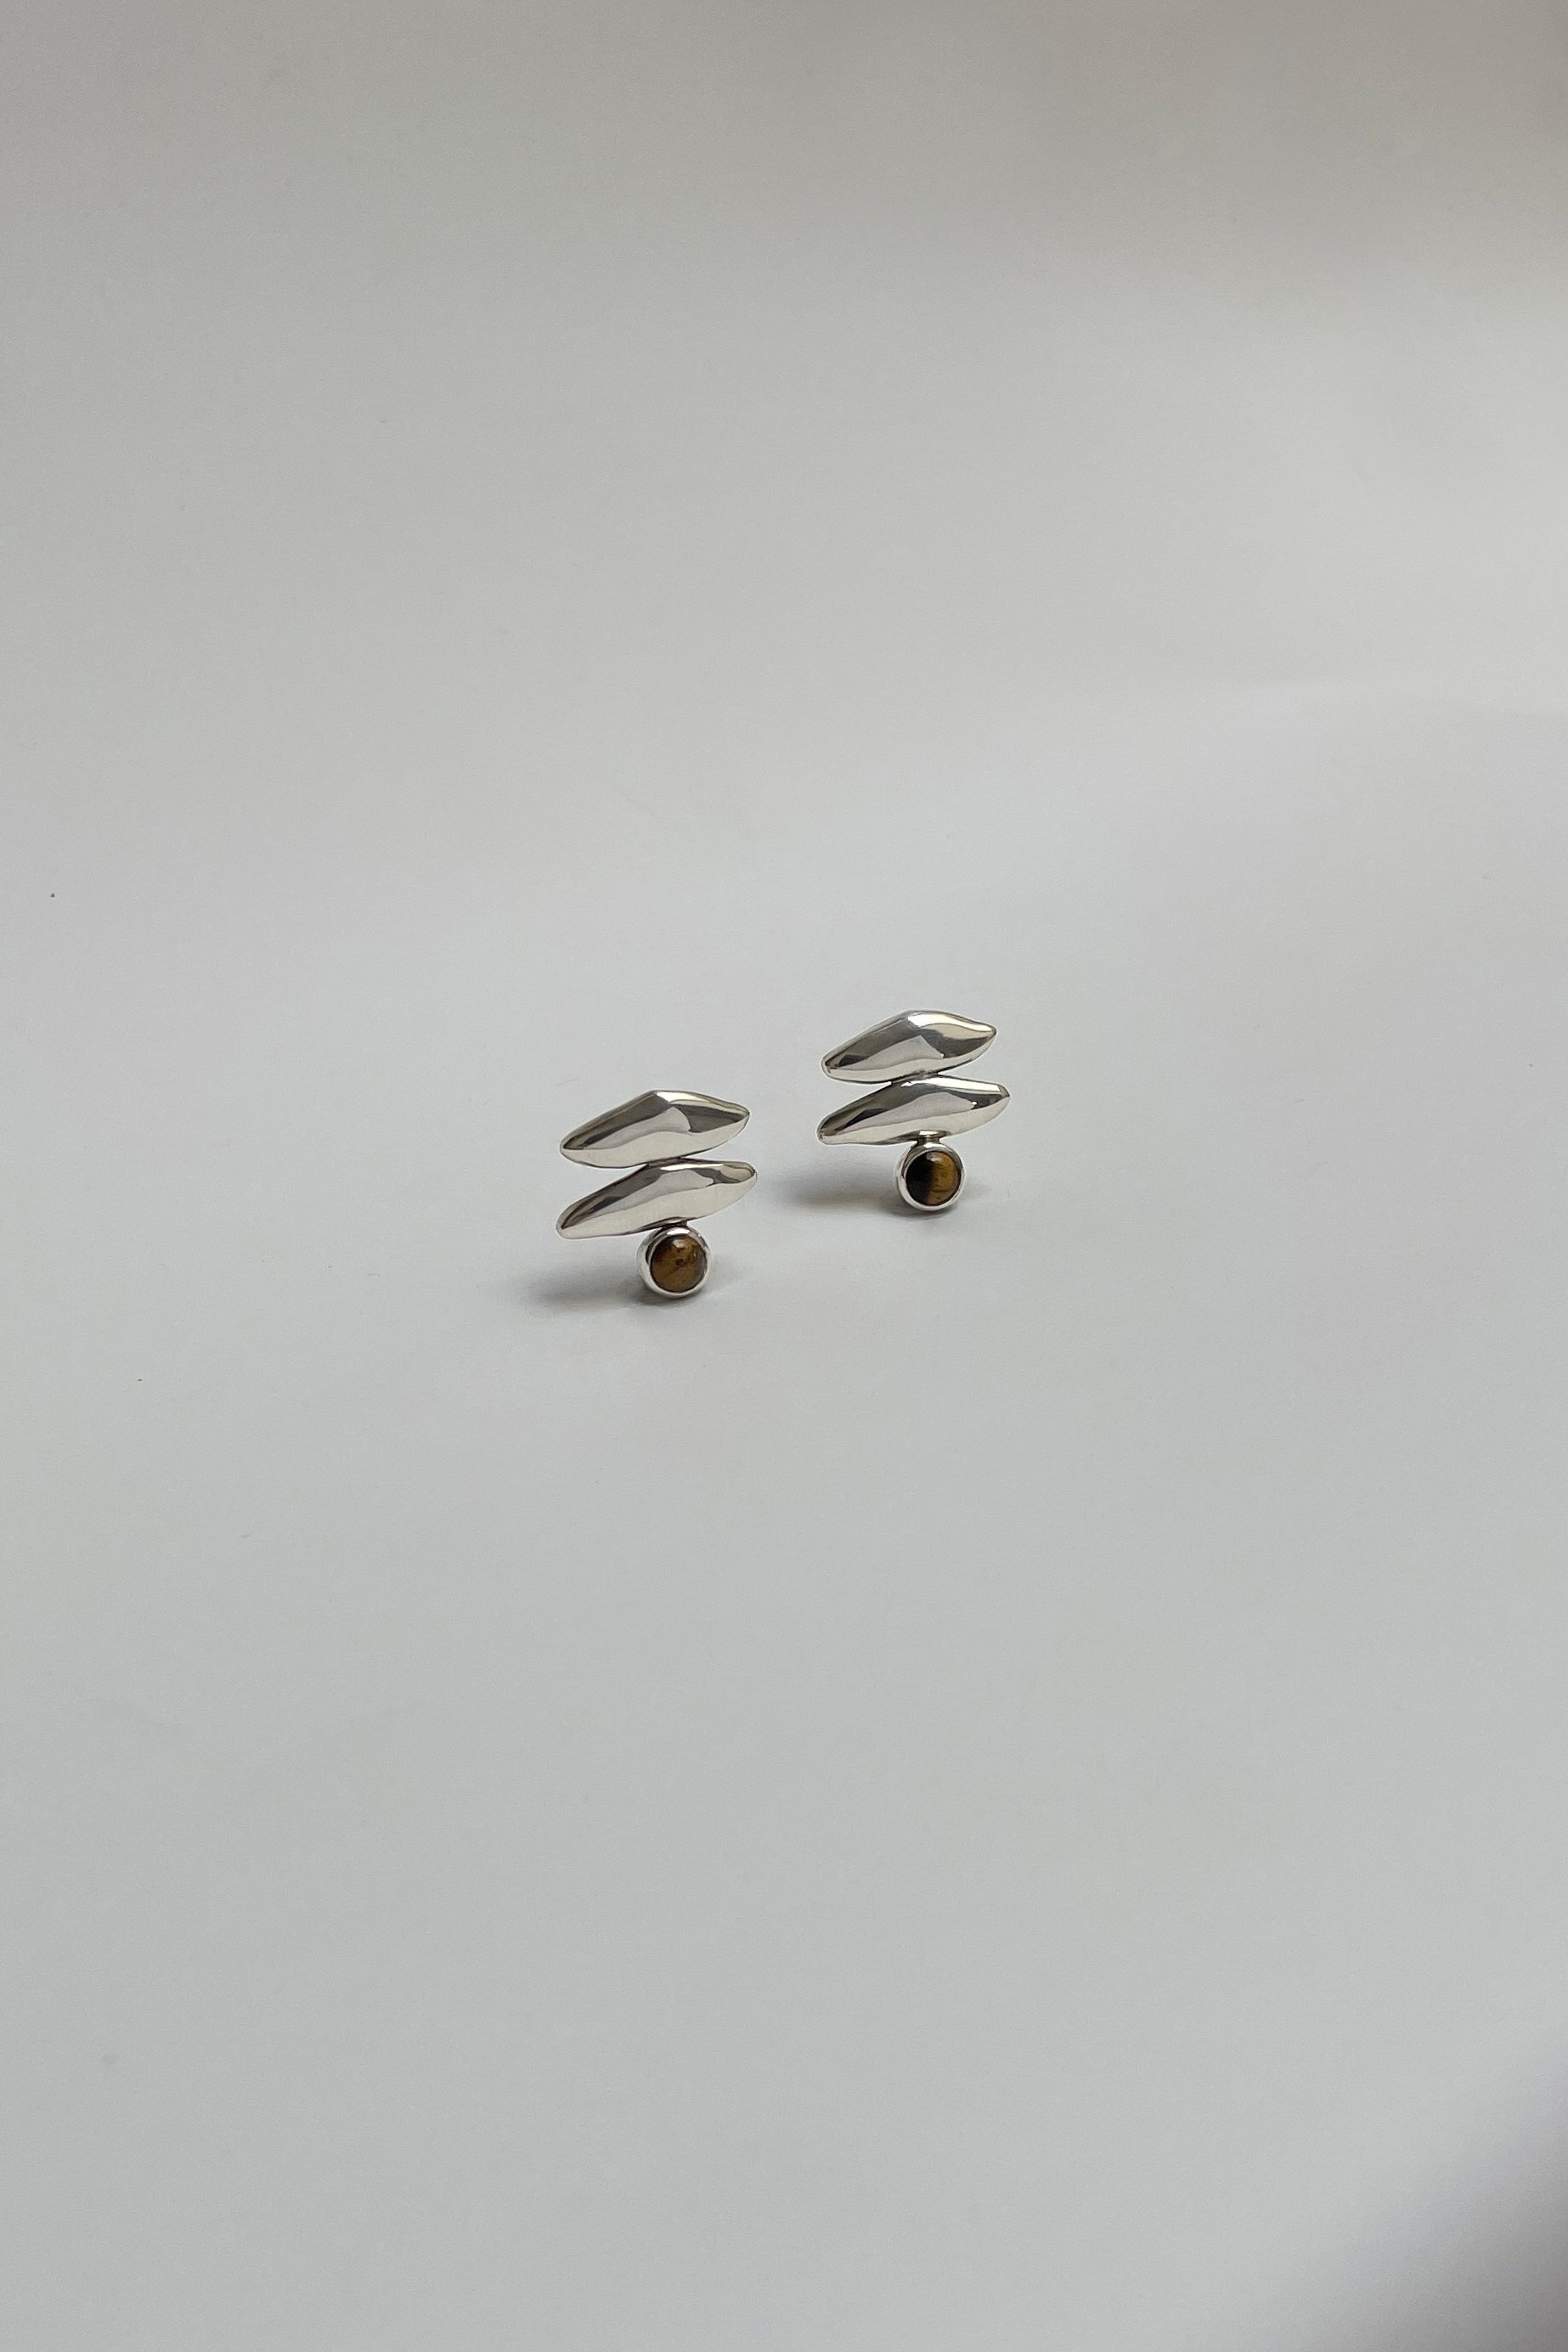 Image of Edition 4. Piece 7. Earrings